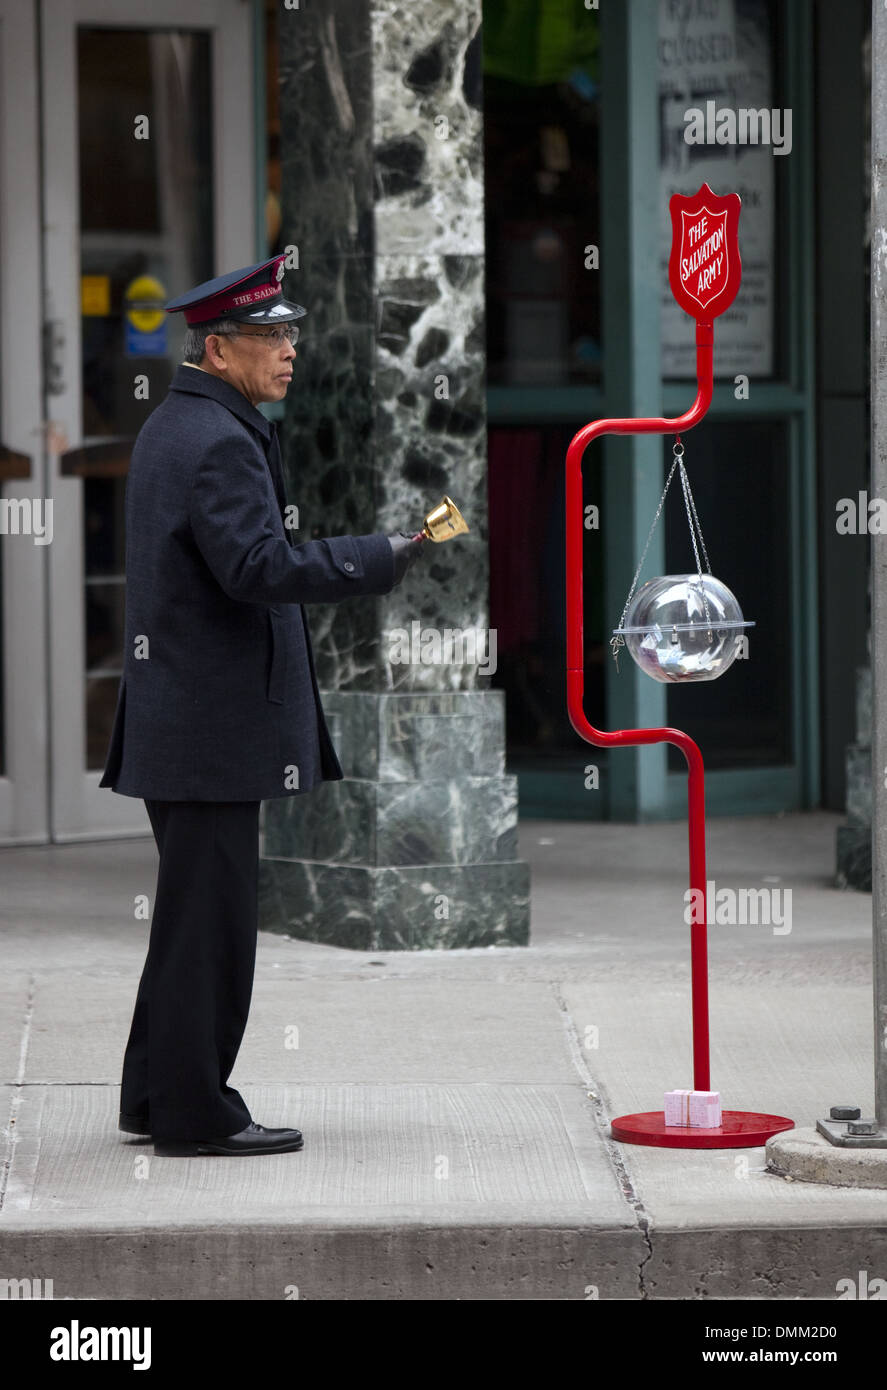 Salvation Army member in downtown Toronto, December 24 2012 Stock Photo